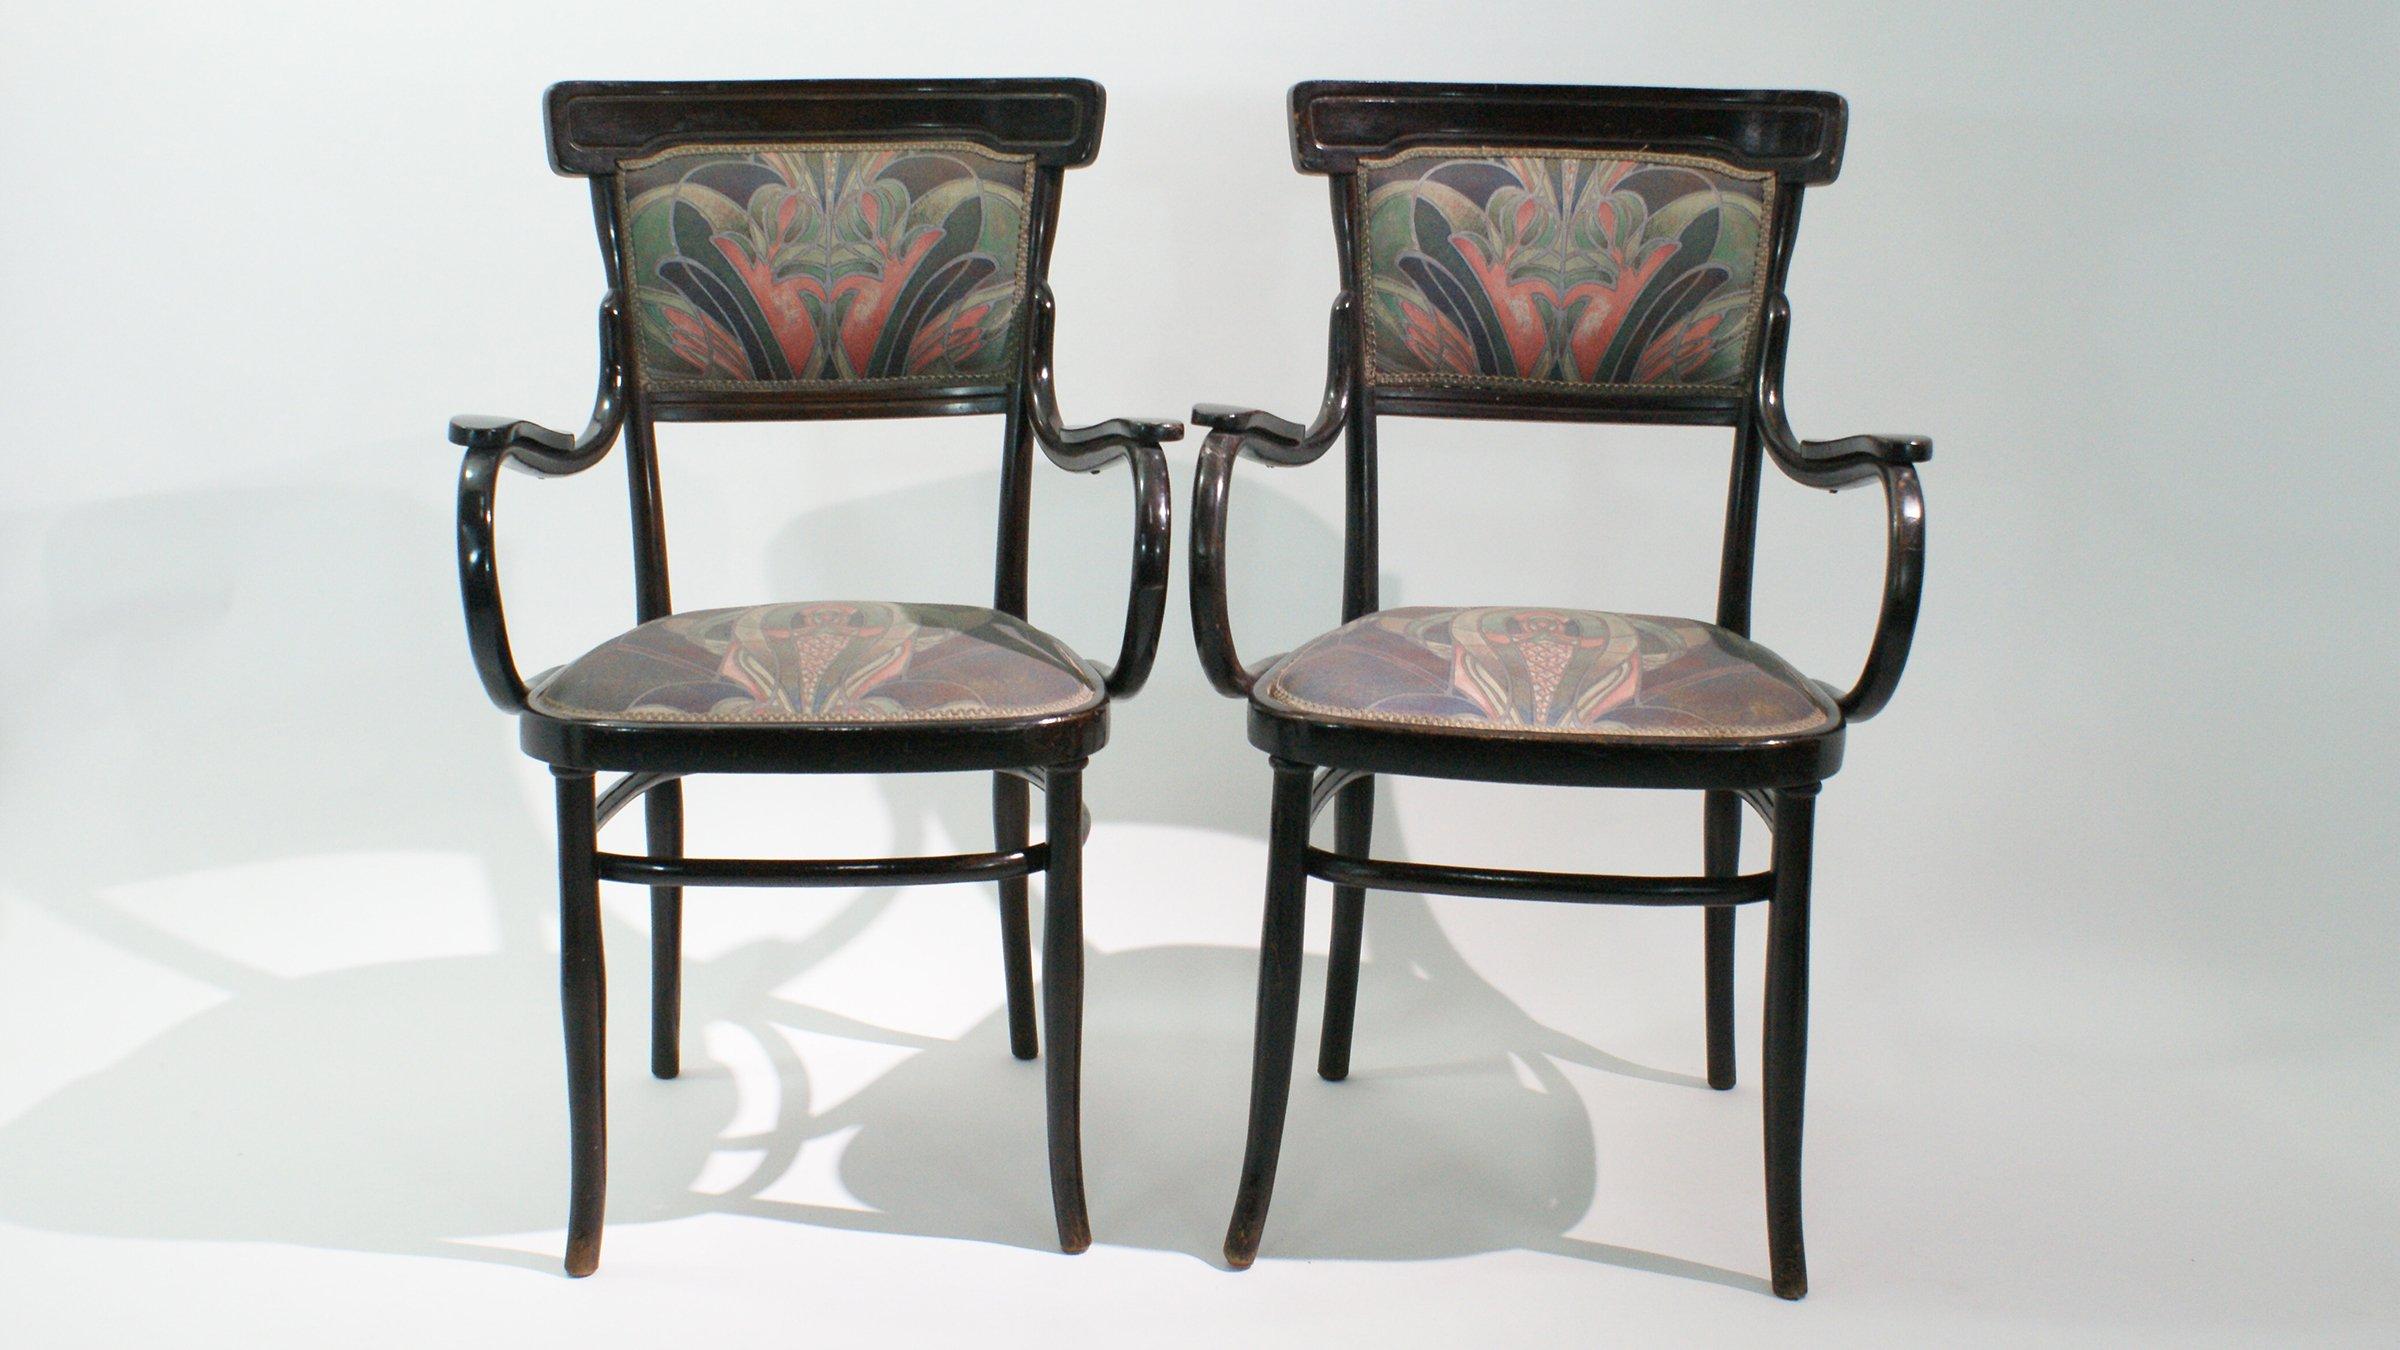 Set of Art Nouveau sofa and two armchair by Jakob e Joseph Kohn, Wien. Bentwood solid walnut with an original upholstery in hand painted silk with typical 1920's design.
Labeled Jakob e Joseph Kohn, Wien and marked in the wood 